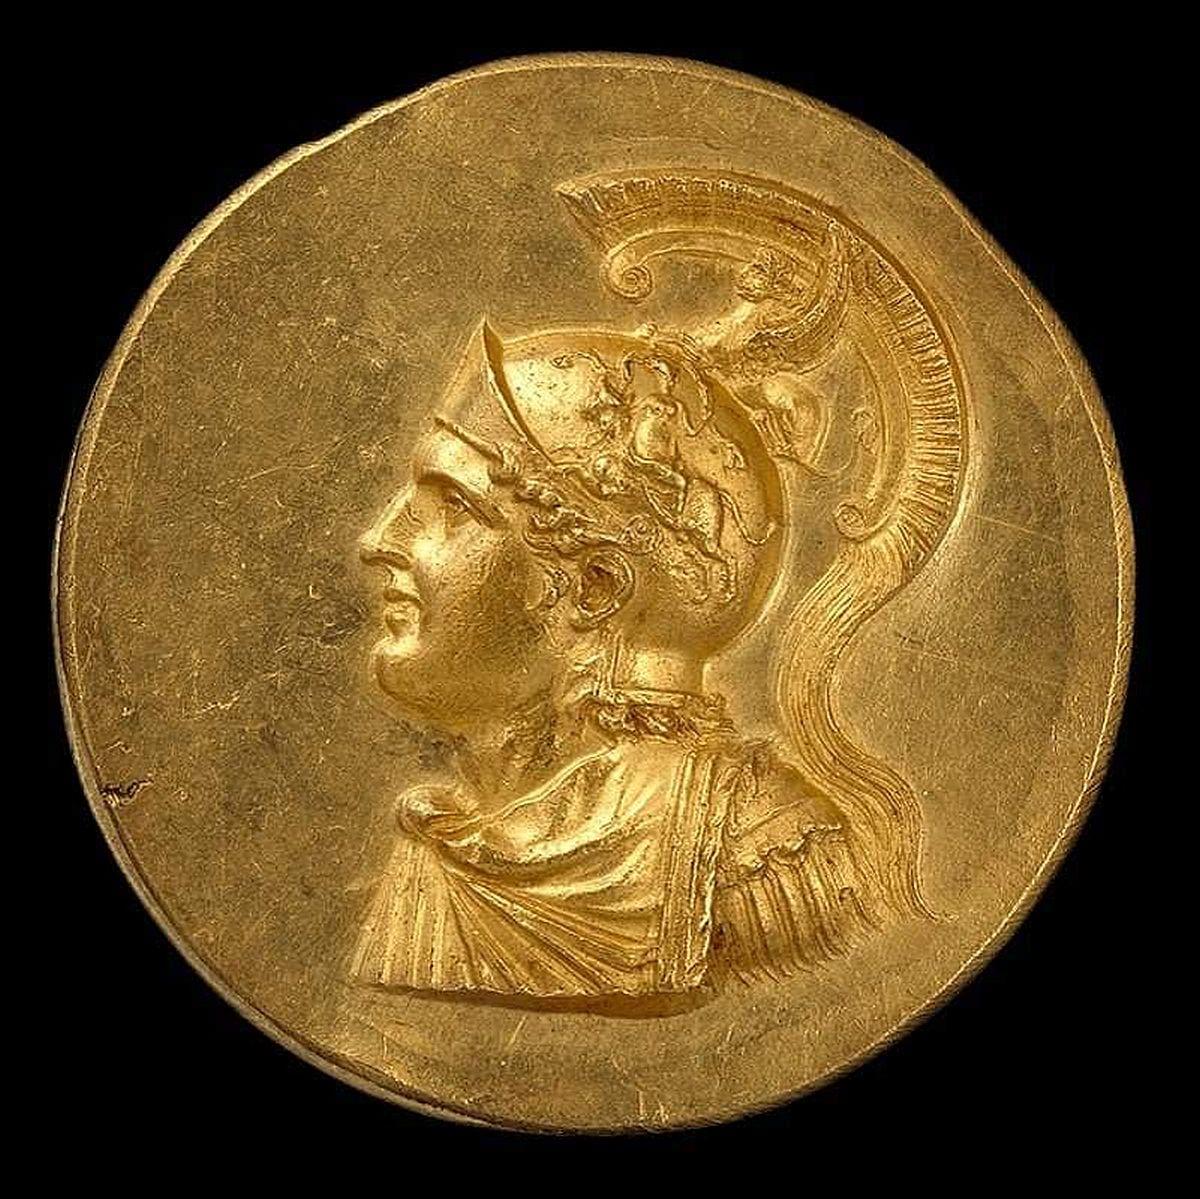 Alexander the Great on a Roman medallion from the 3rd century CE, found in Abu Qir, northern Egypt. Alexander is wearing an Attic helmet with his head raised, suggesting his divinity.jpeg